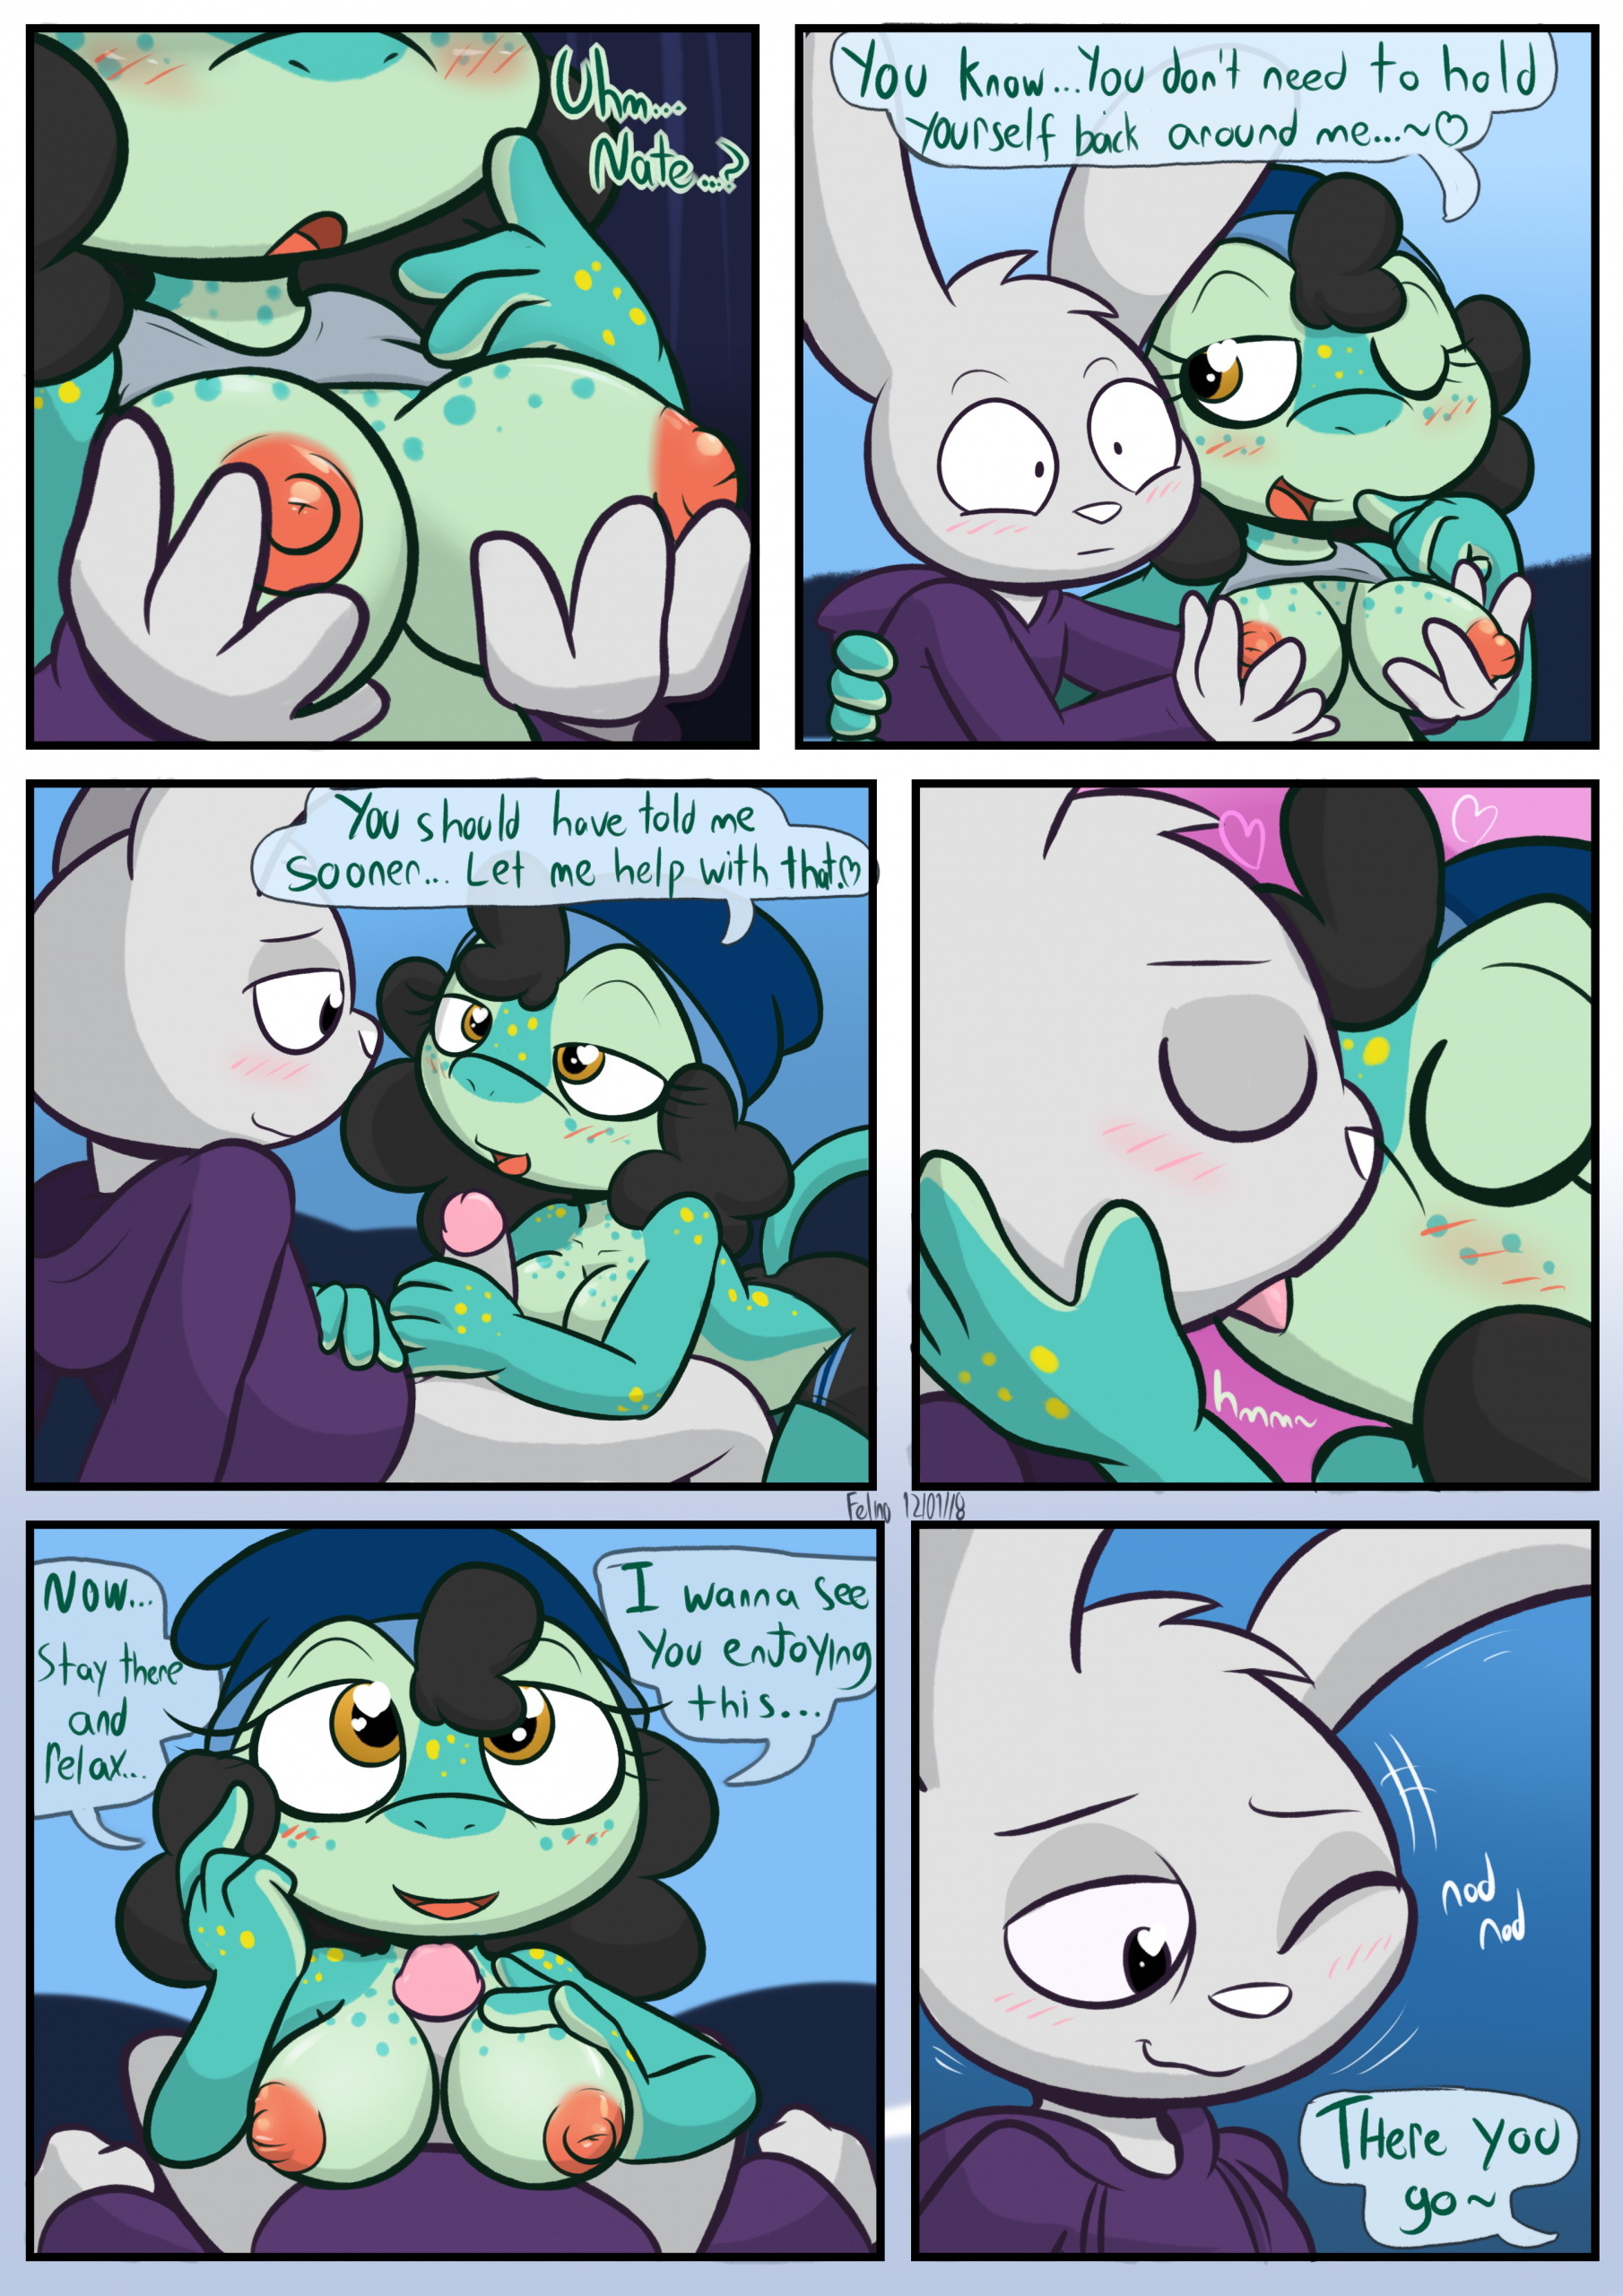 Netflix and Chill with benefits - Page 2